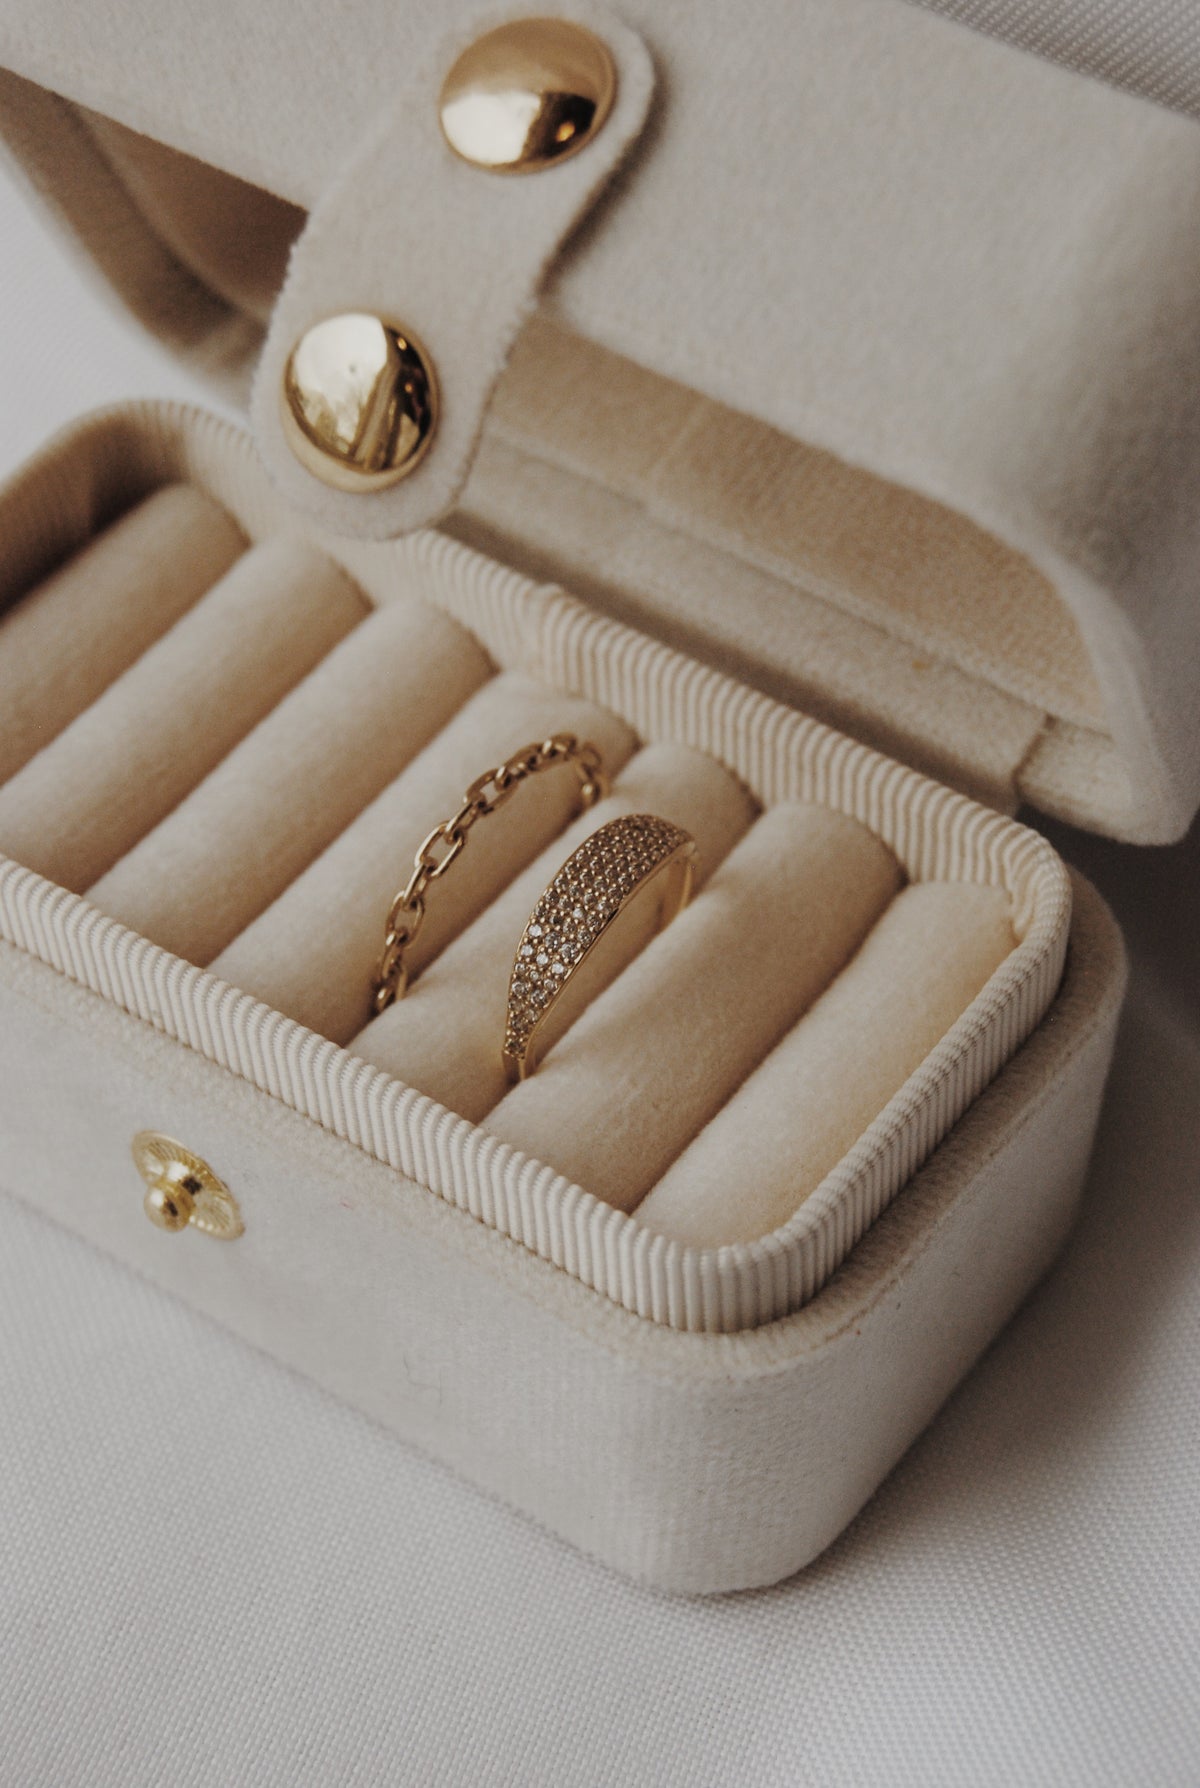 Olive Branch Jewelry & Co. “The Ring Box”